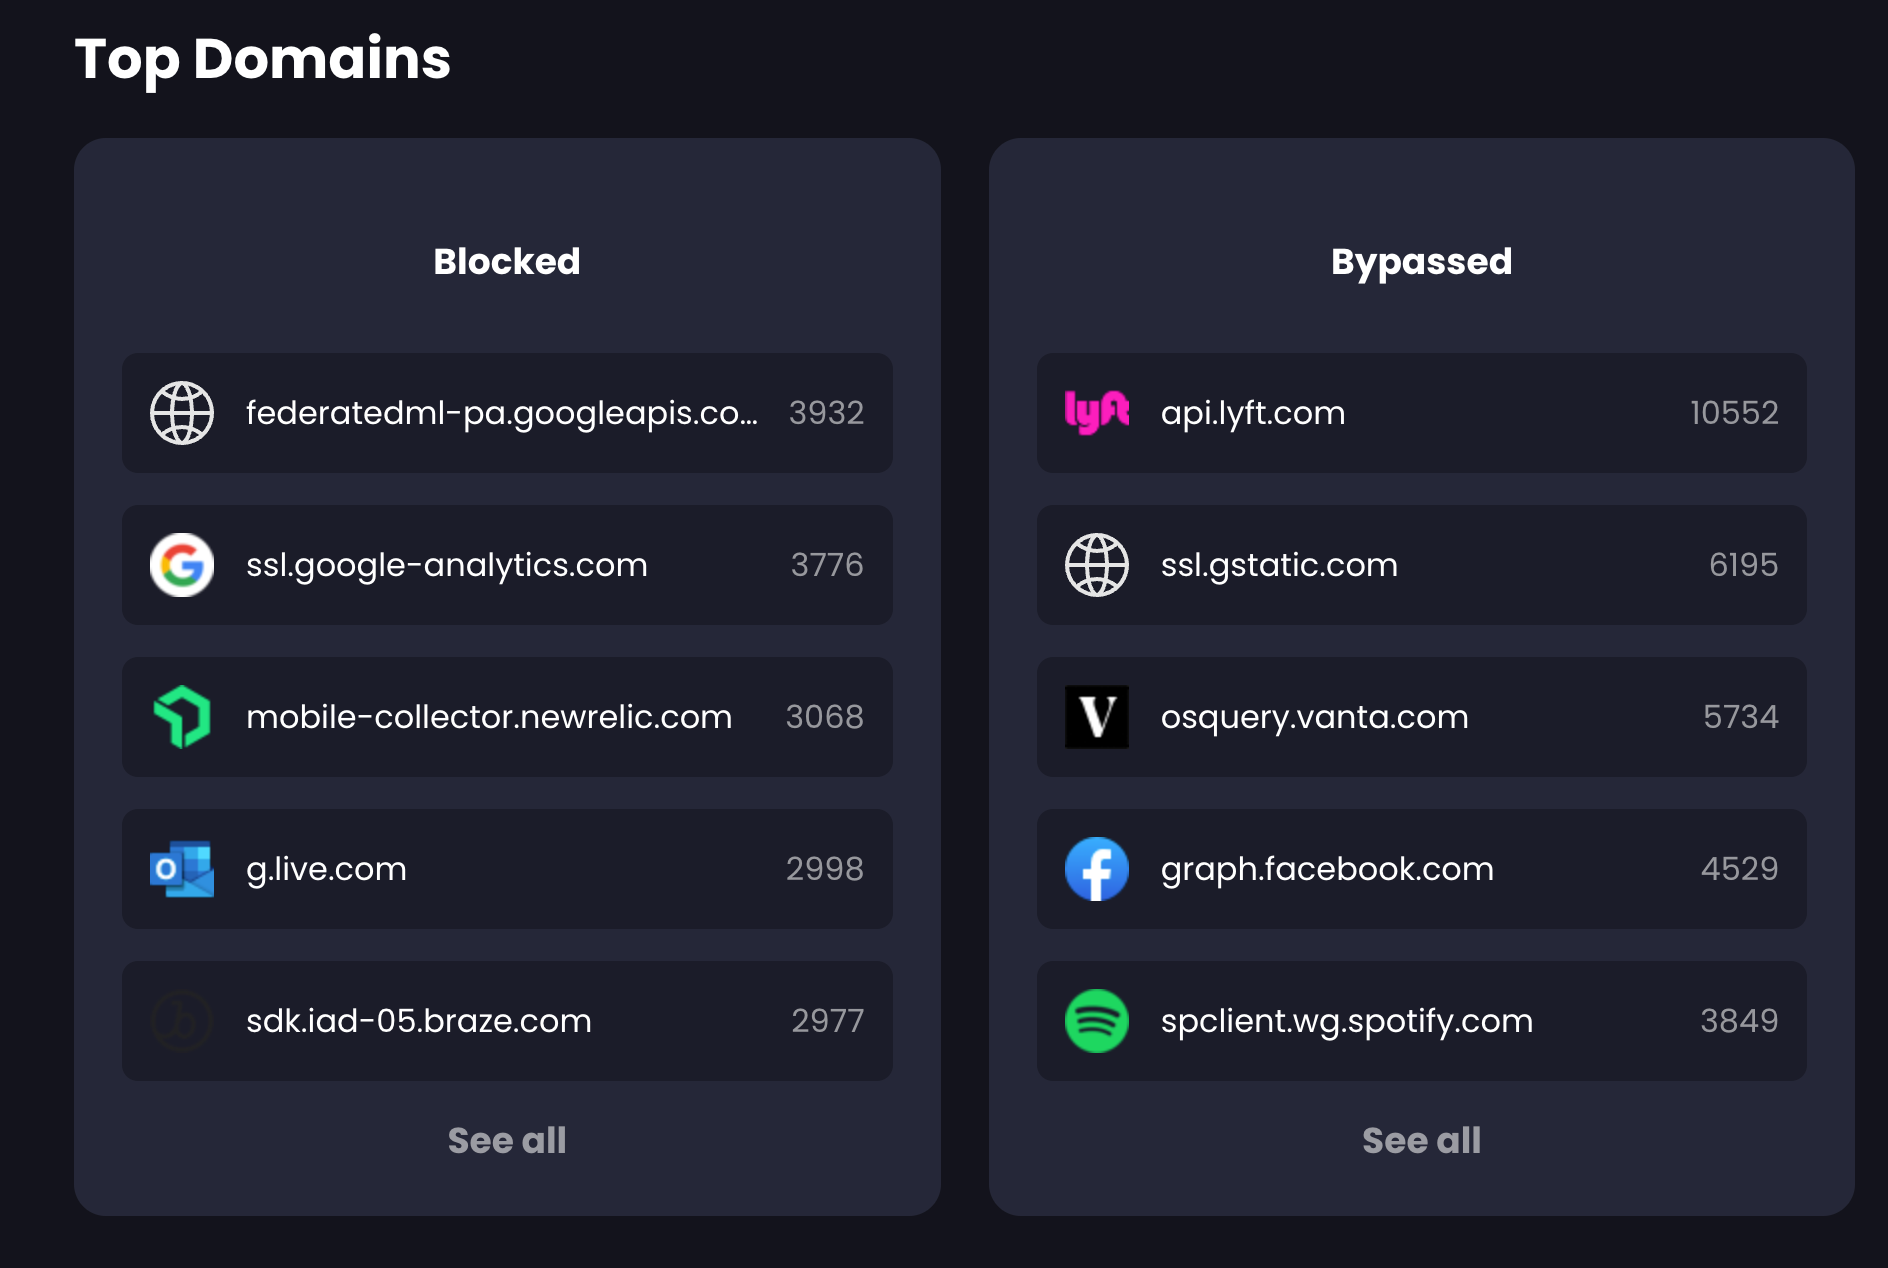 List of the top 5 most Blocked and most Bypassed domains; Google is #1 & #2 on Blocked